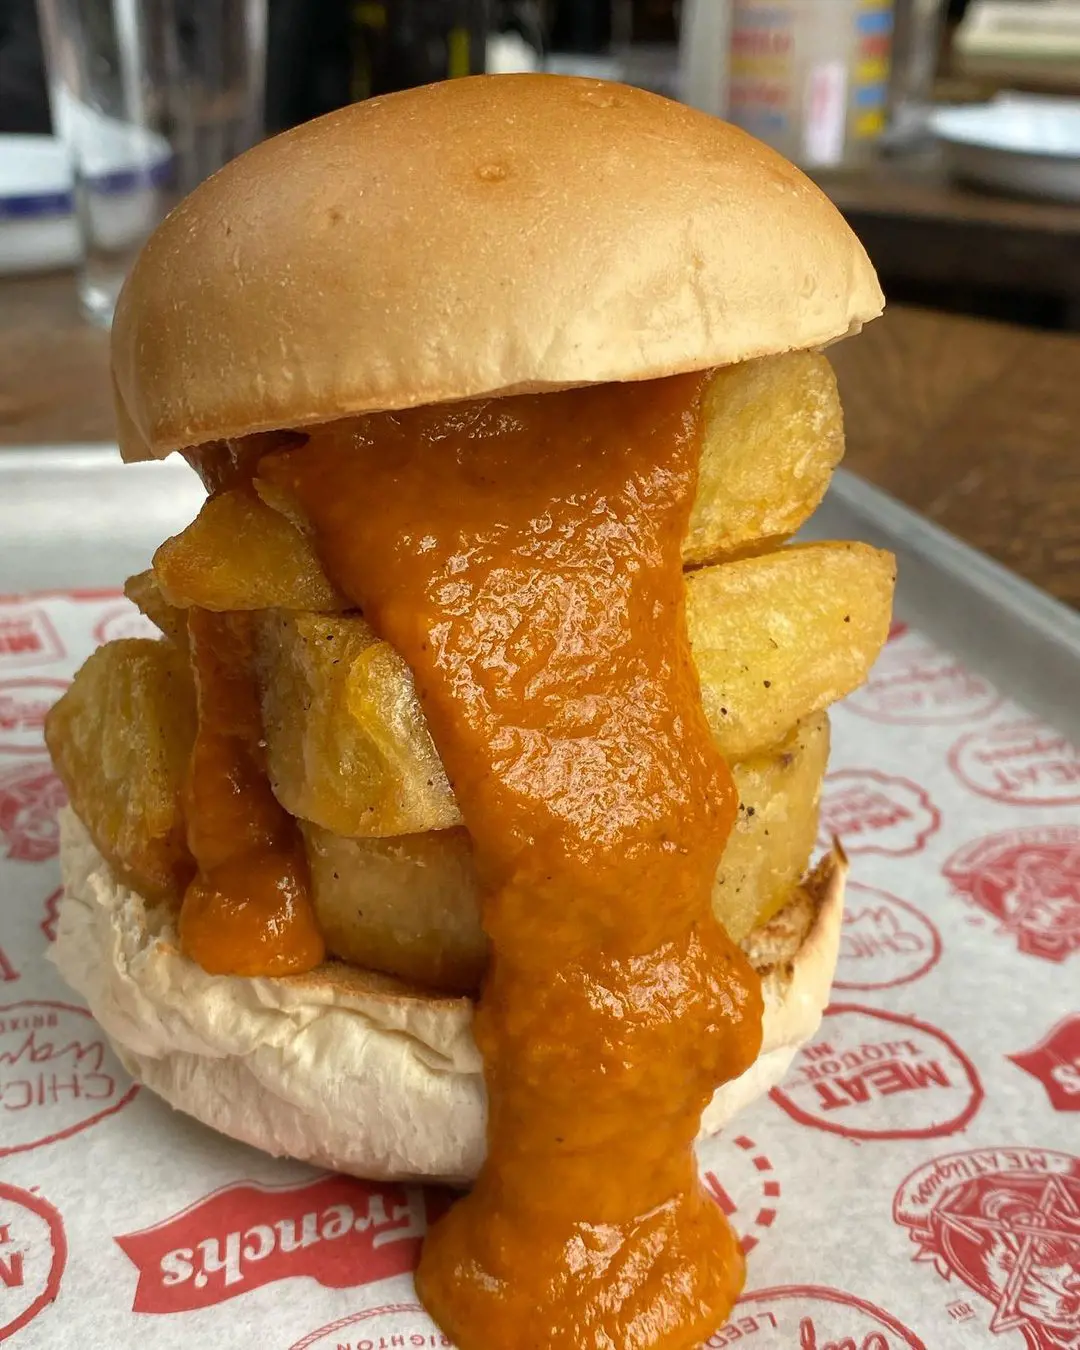 Chip butty & Curry sauce